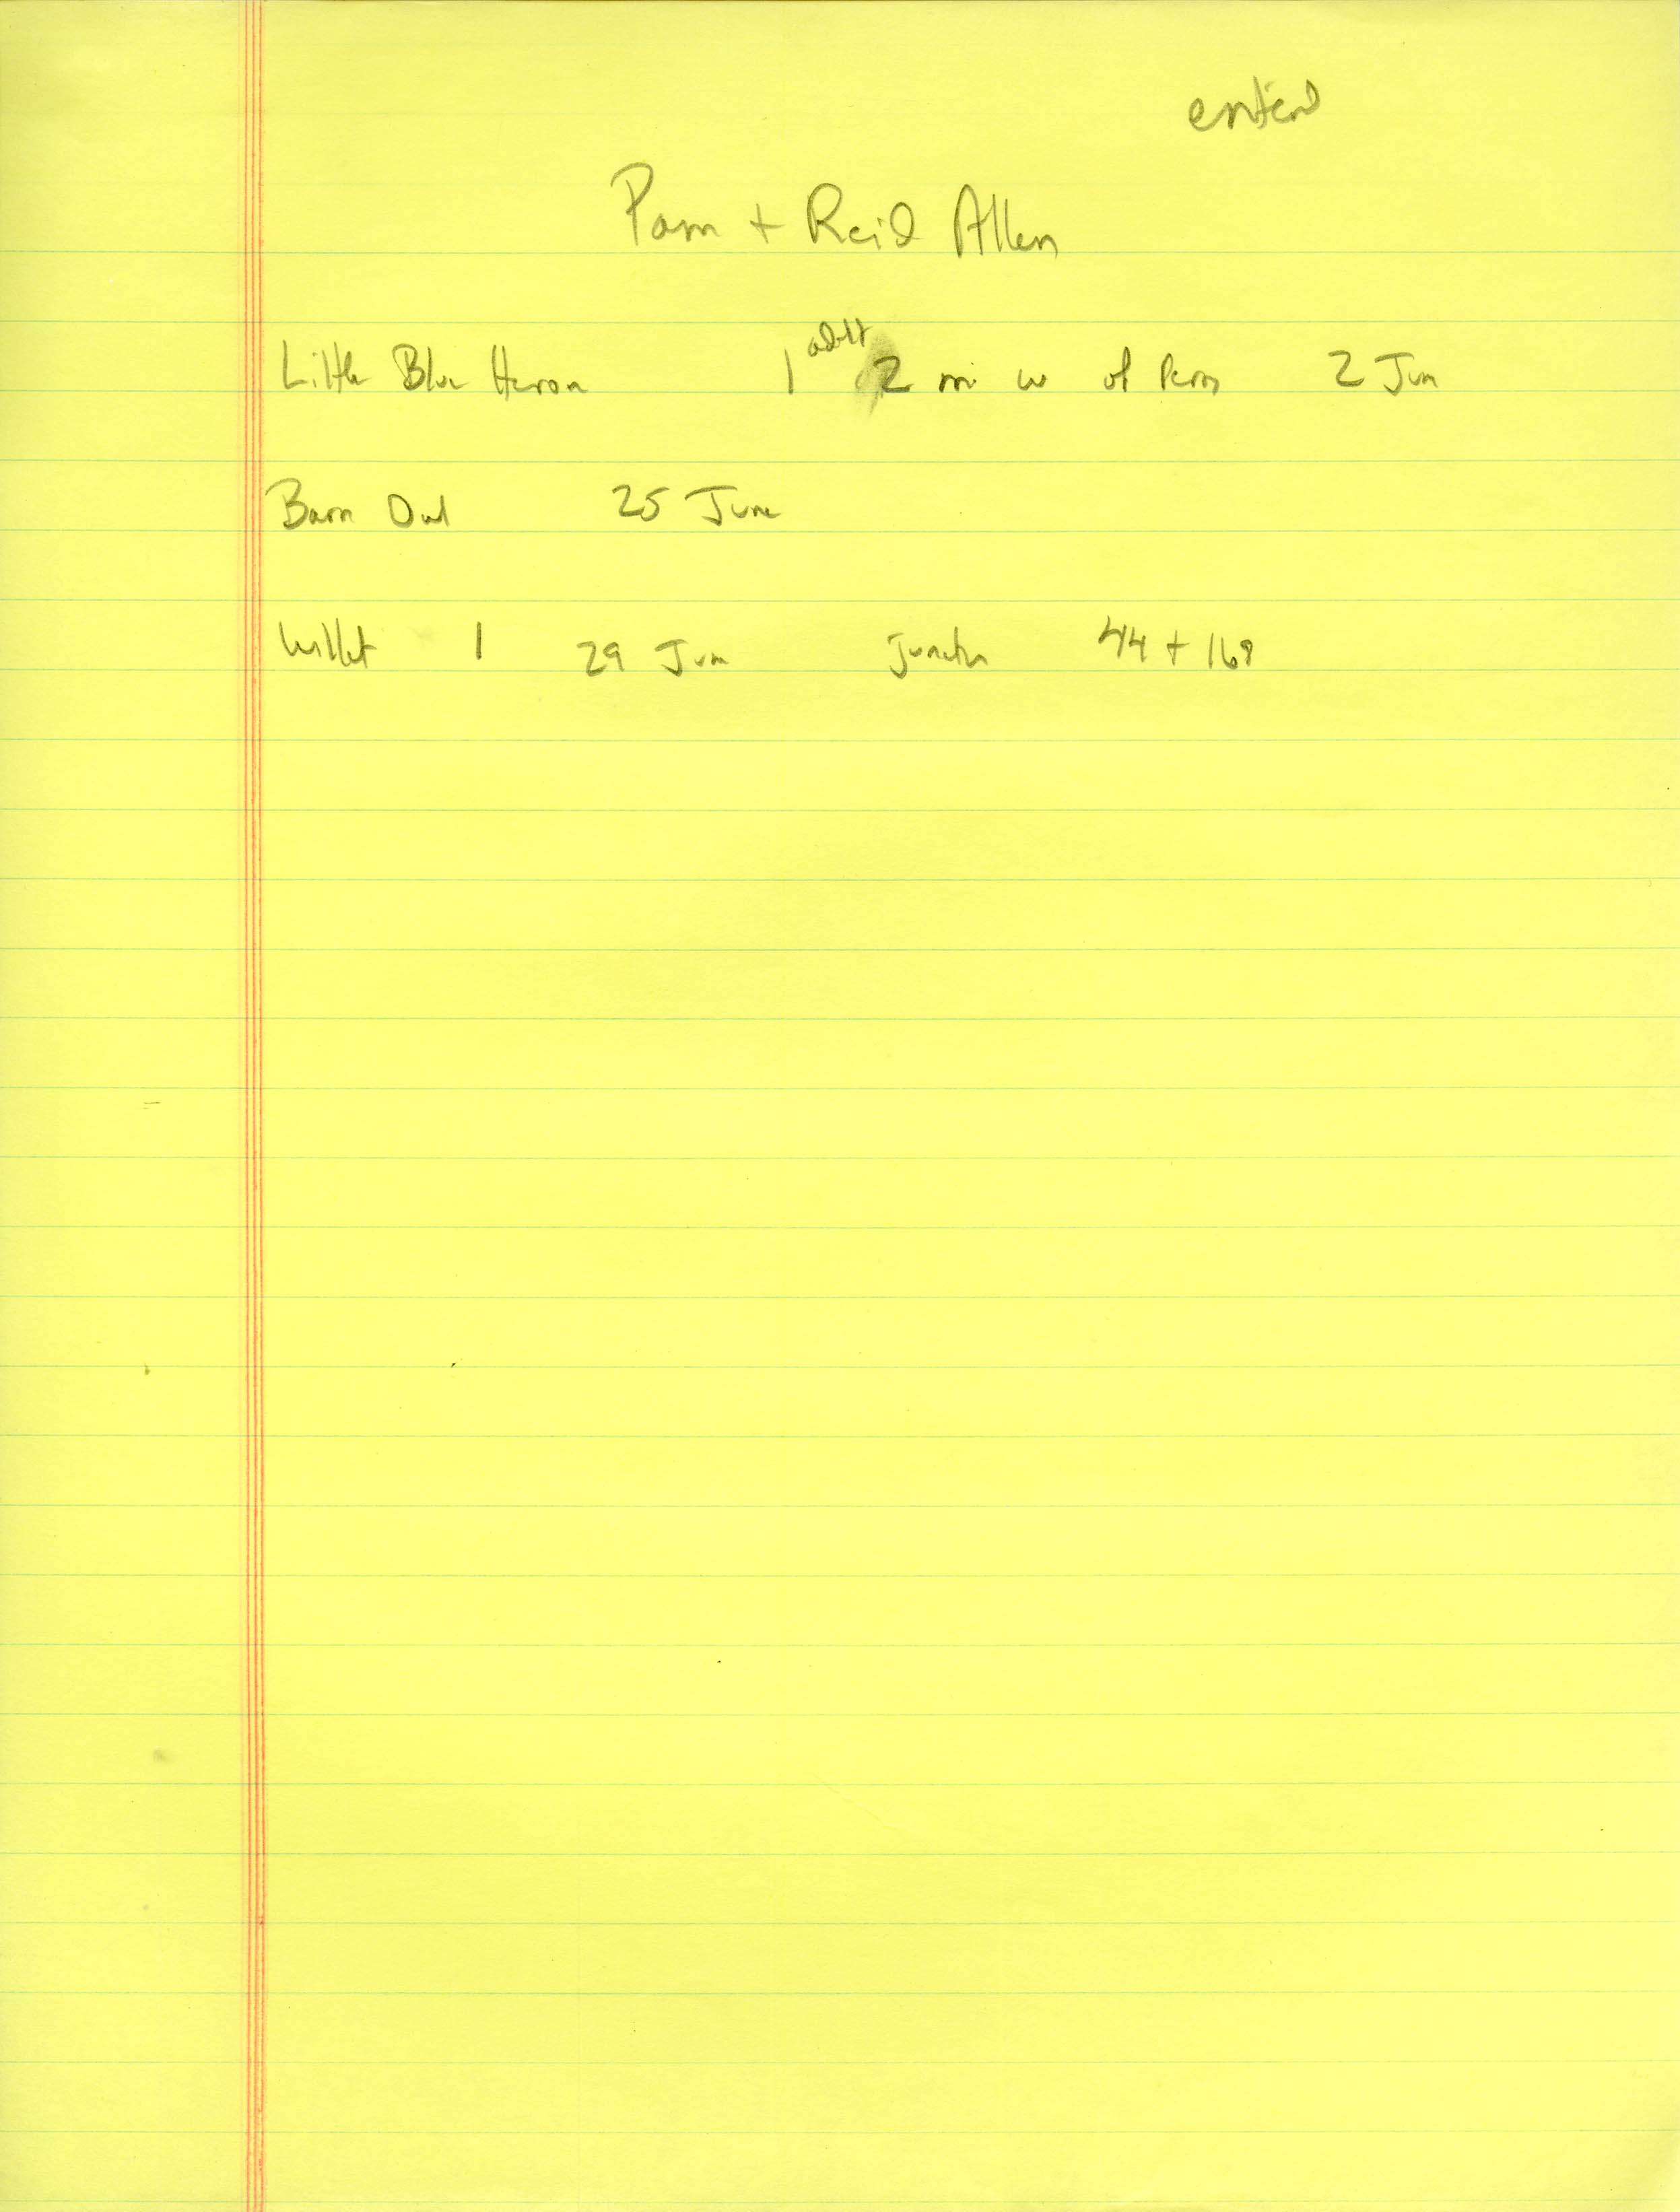 Field notes contributed by Pam Allen and Reid I. Allen, summer 1991